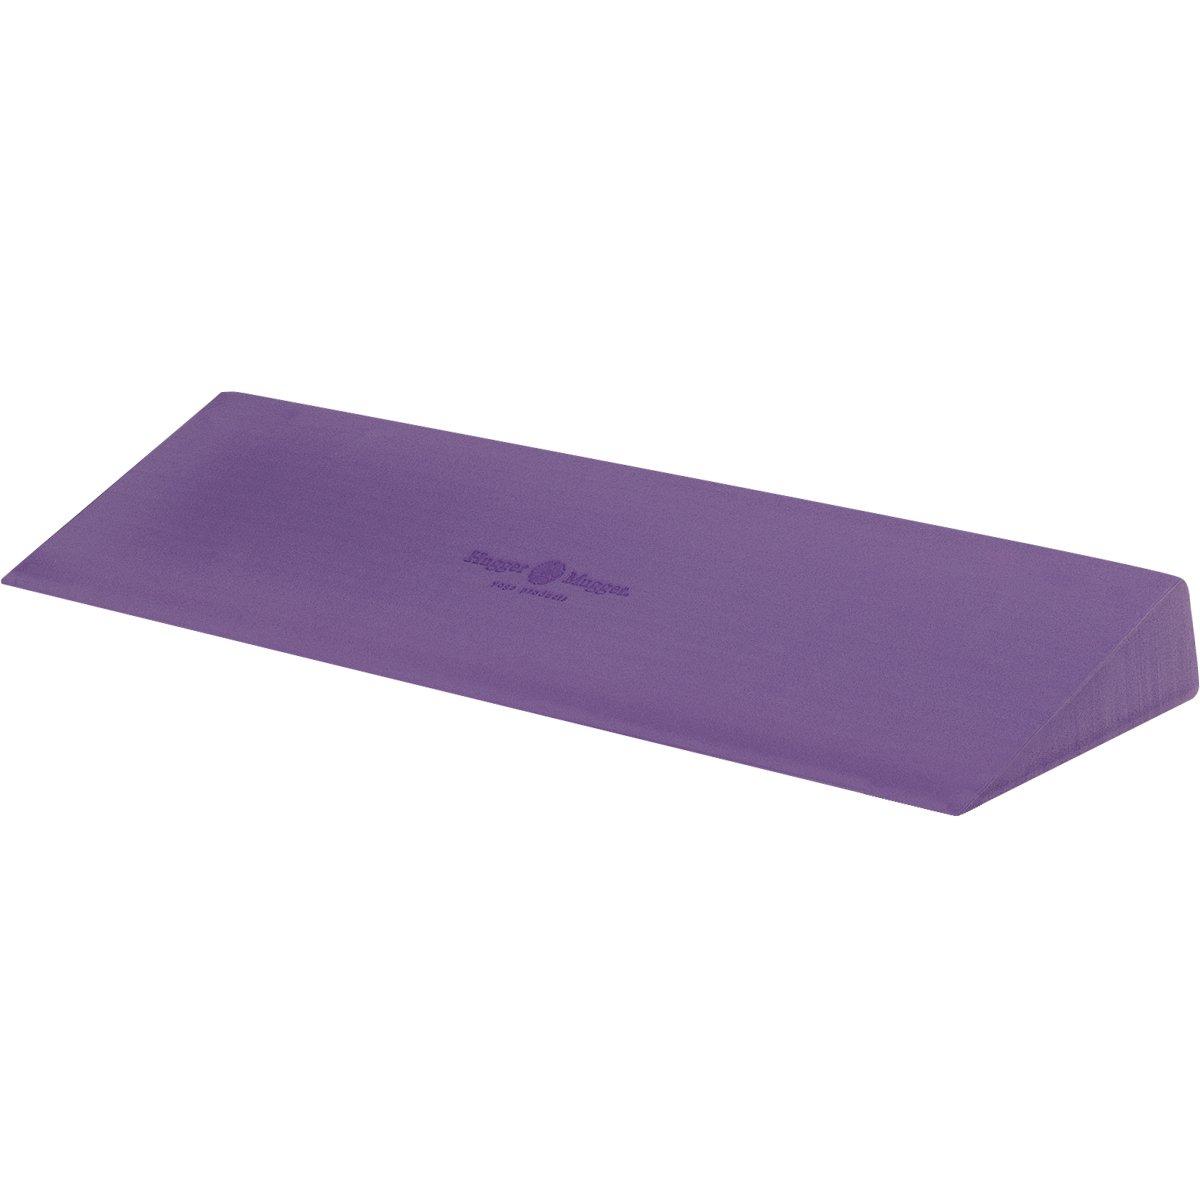 Hugger Mugger Yoga Wedge - Gentle Lift for Sensitive Wrists, Durable and  Stable, Supports Joints, Great for Downward Dog Purple